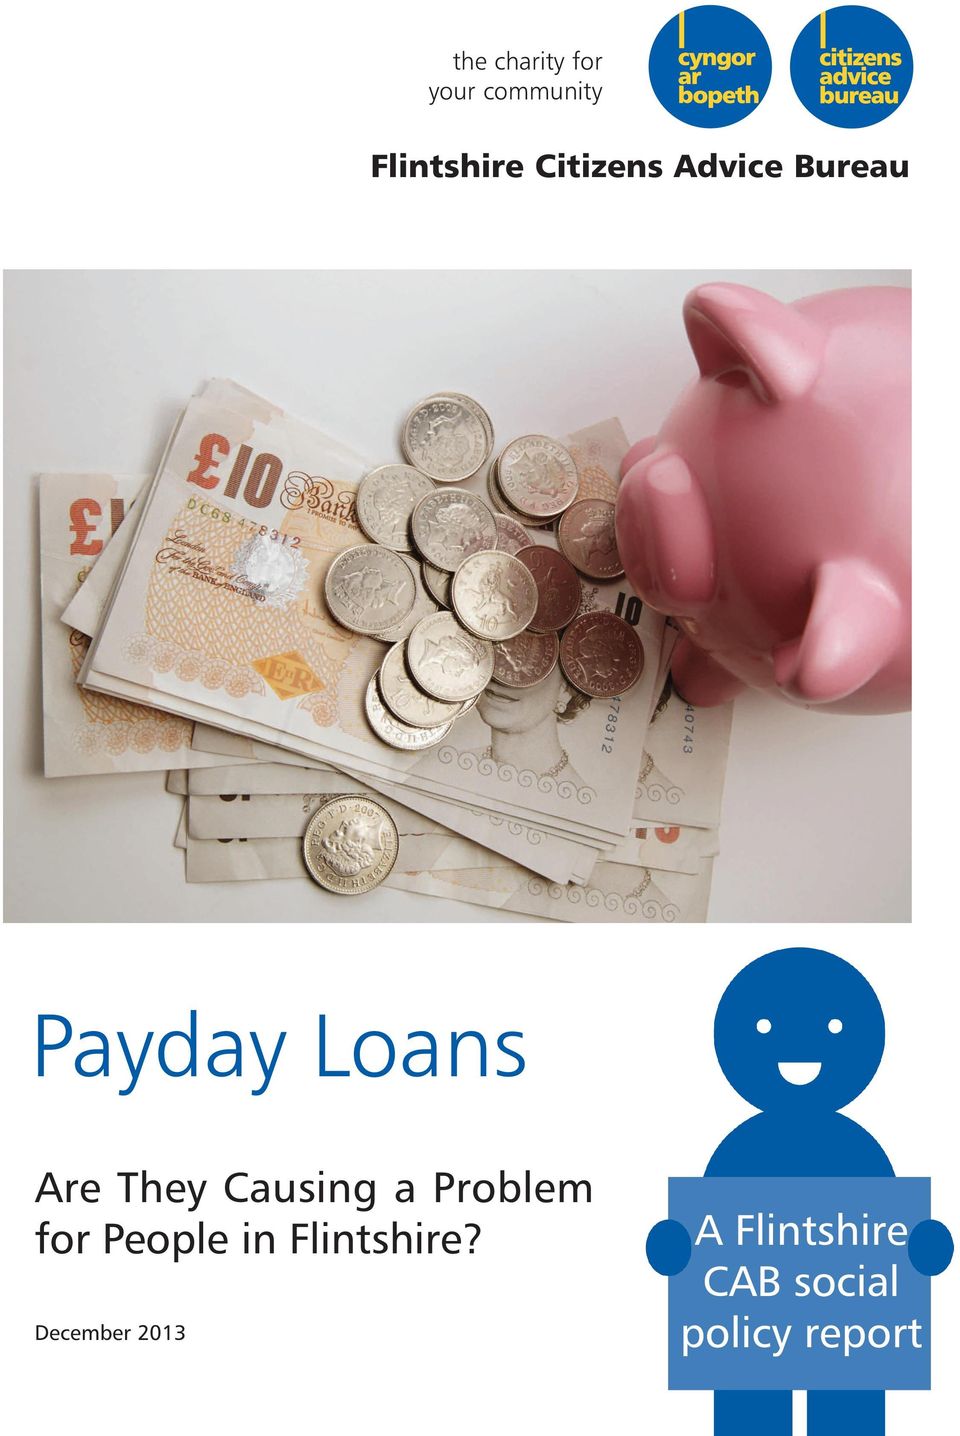 Bureau Payday Loans Are They Causing a Problem for